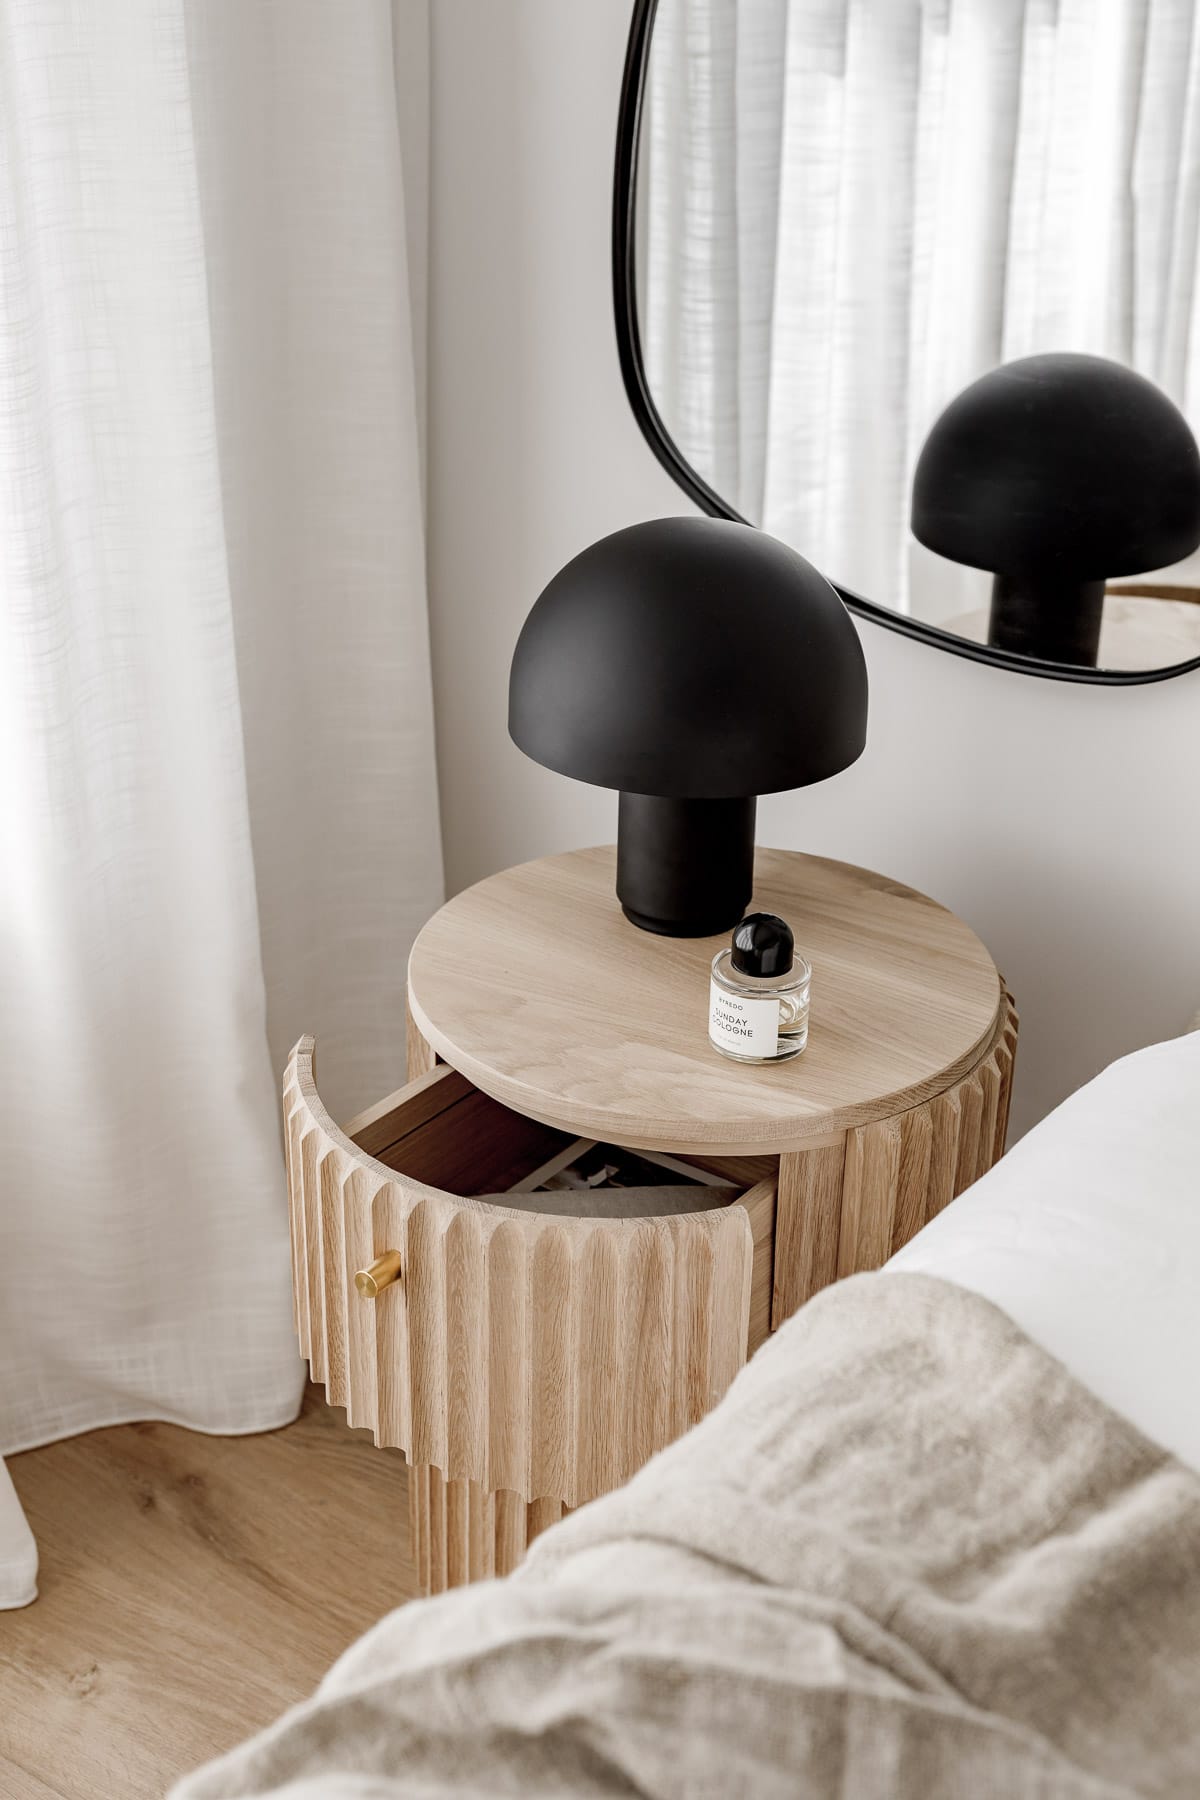 Detail shot of the Underline Bedside Table by Hegi Design House styled in a bedroom with the drawer open